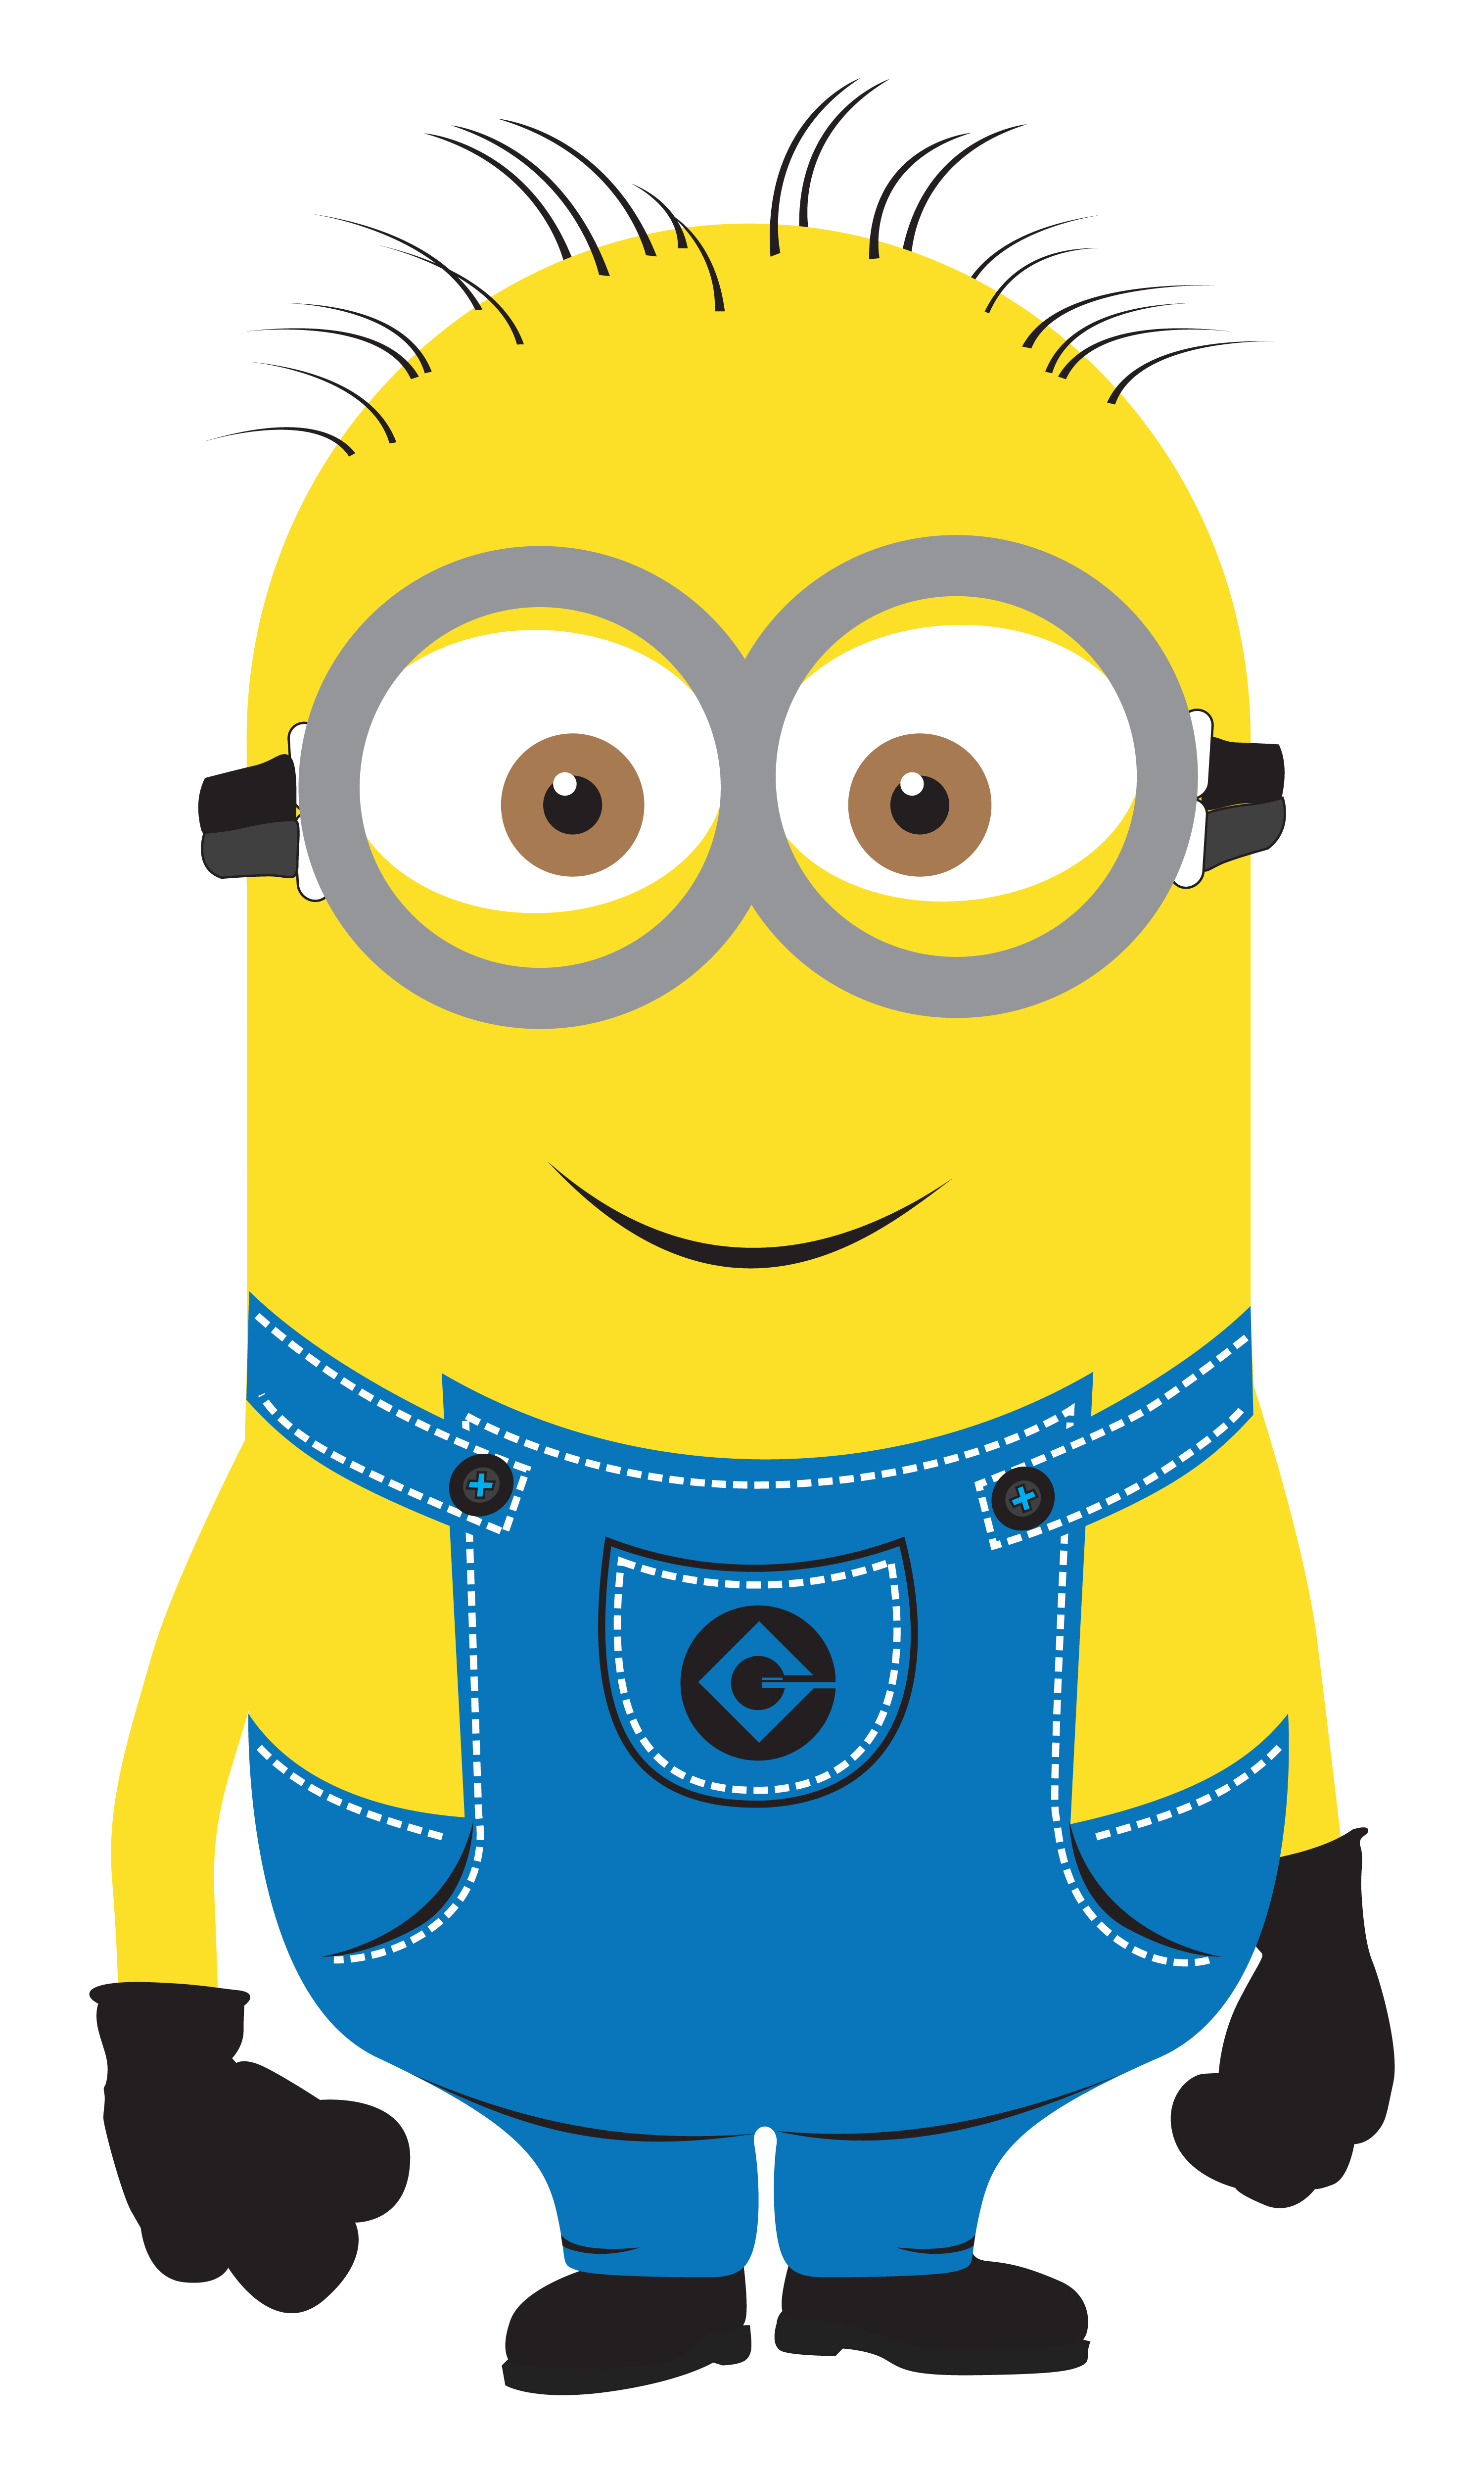 Minions.png - ClipArt Best